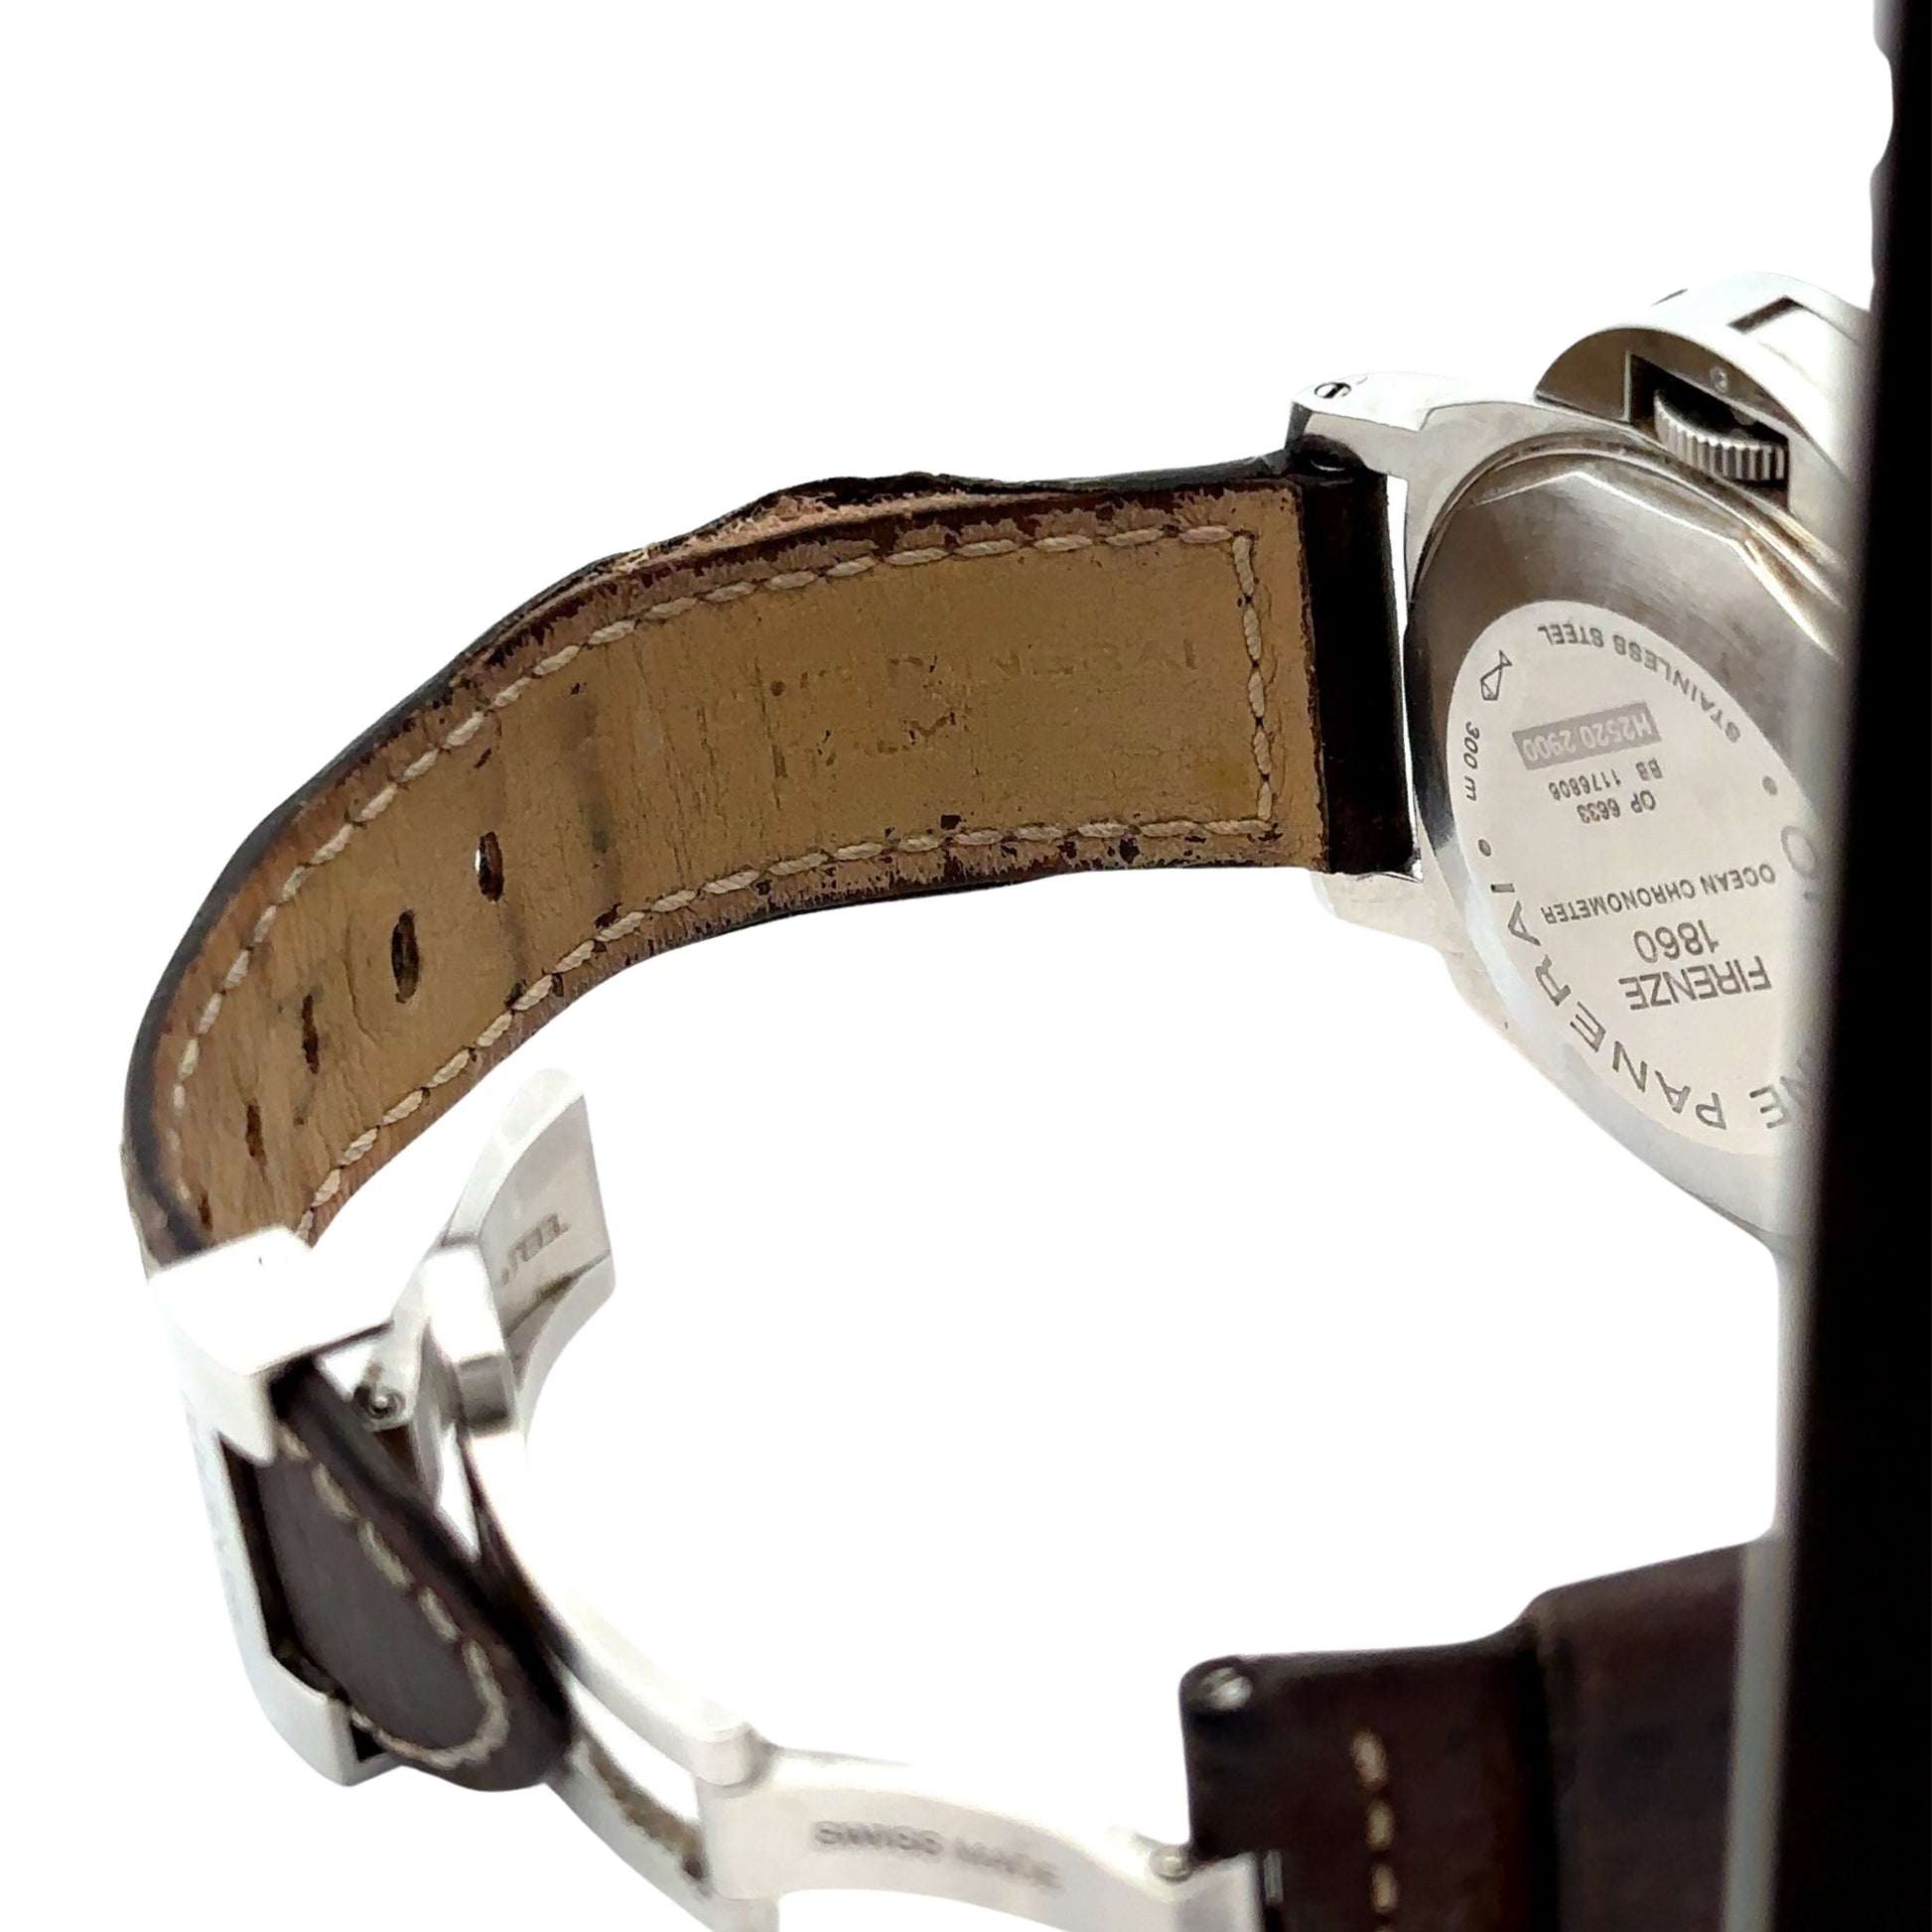 inside of brown leather band with wear